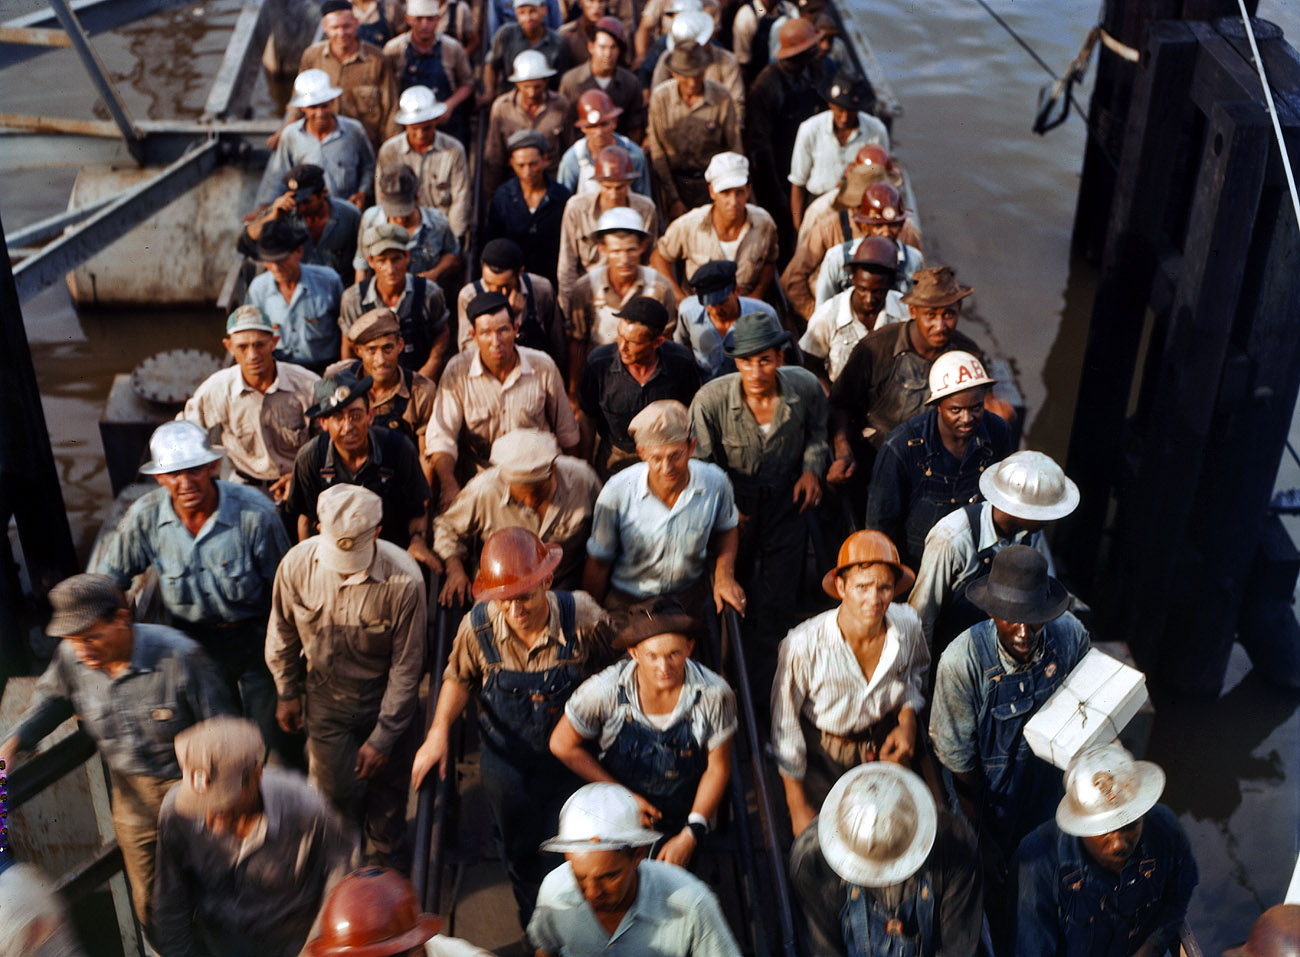 June 1943. Workers leaving the Pennsylvania shipyards at Beaumont, Texas. View full size. 4x5 Kodachrome transparency by John Vachon.